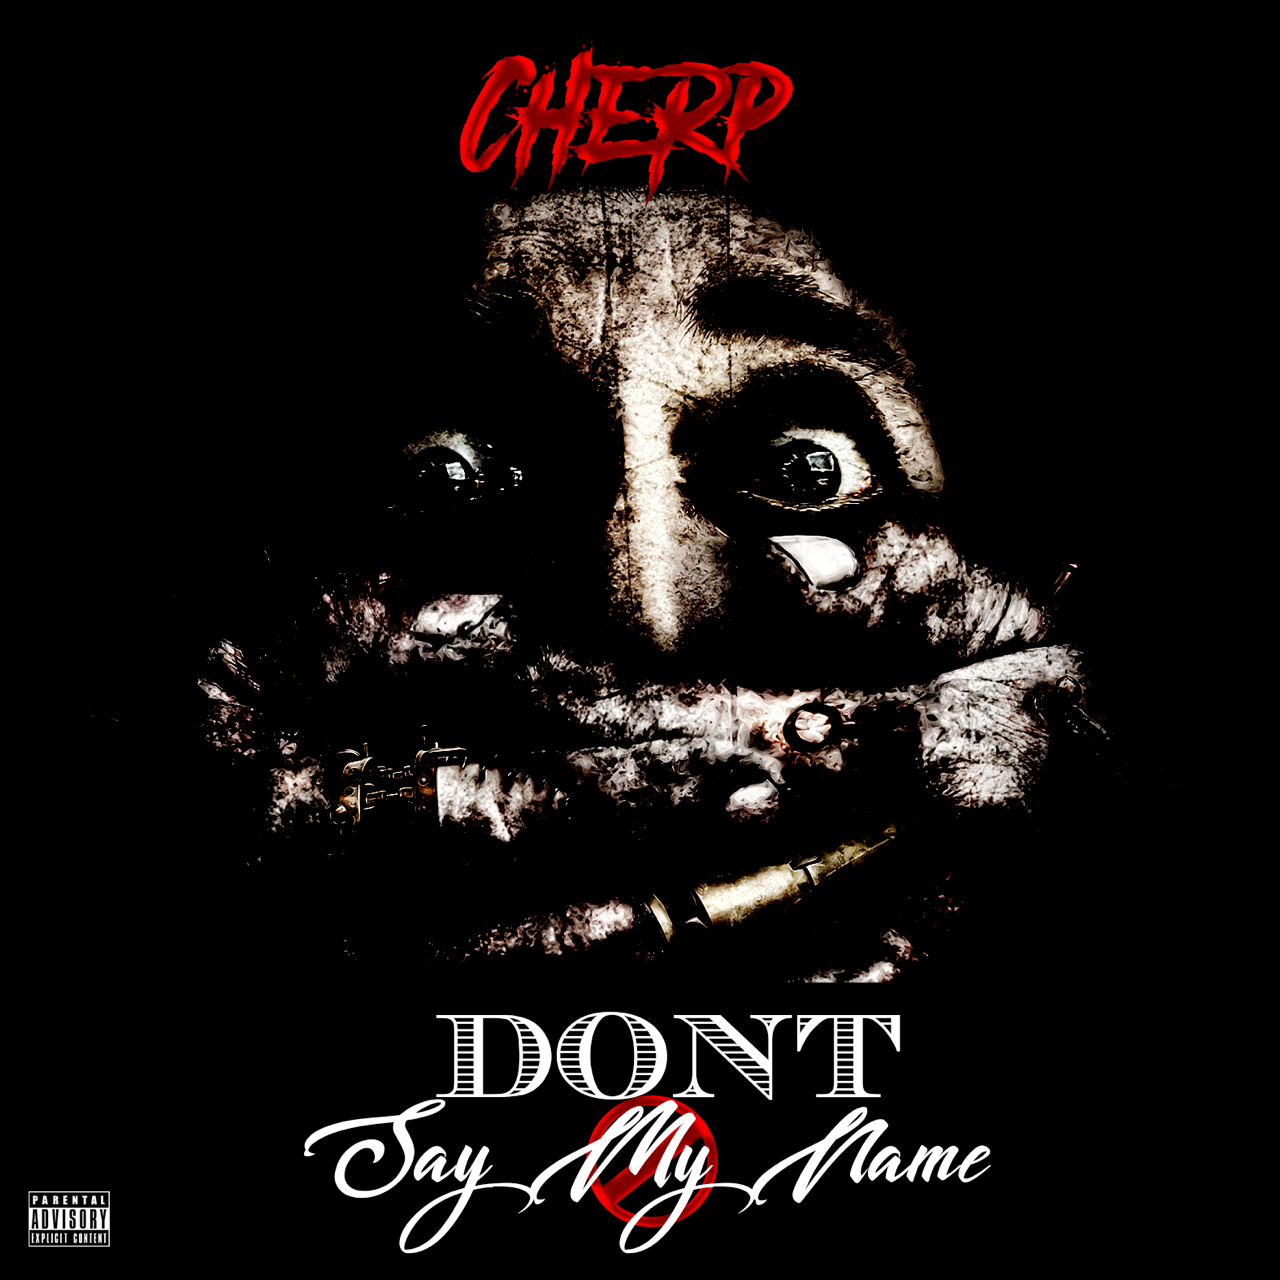 Single- Cherp – “Don’t Say My Name” @RealCherp